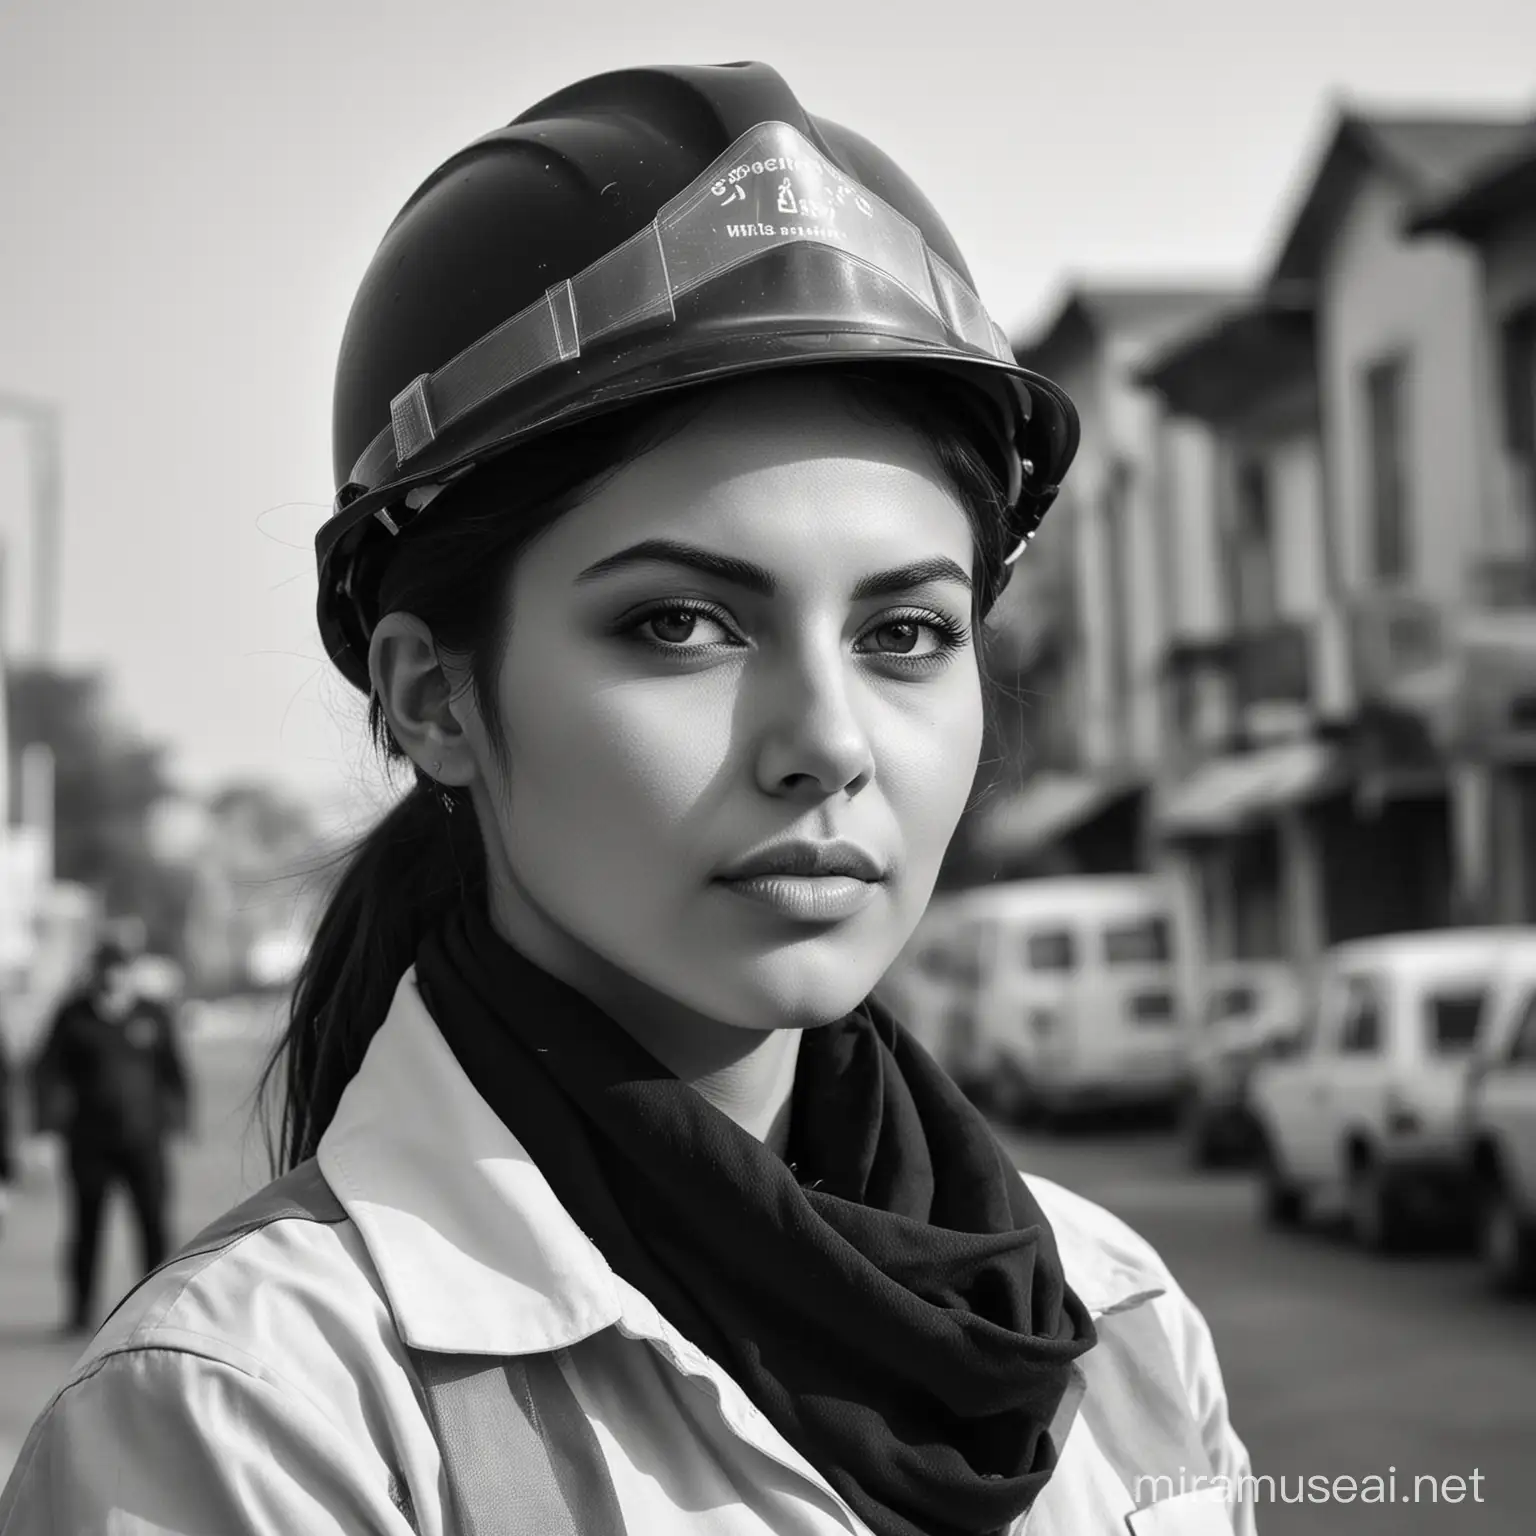 Empowering Women Safety in Black and White